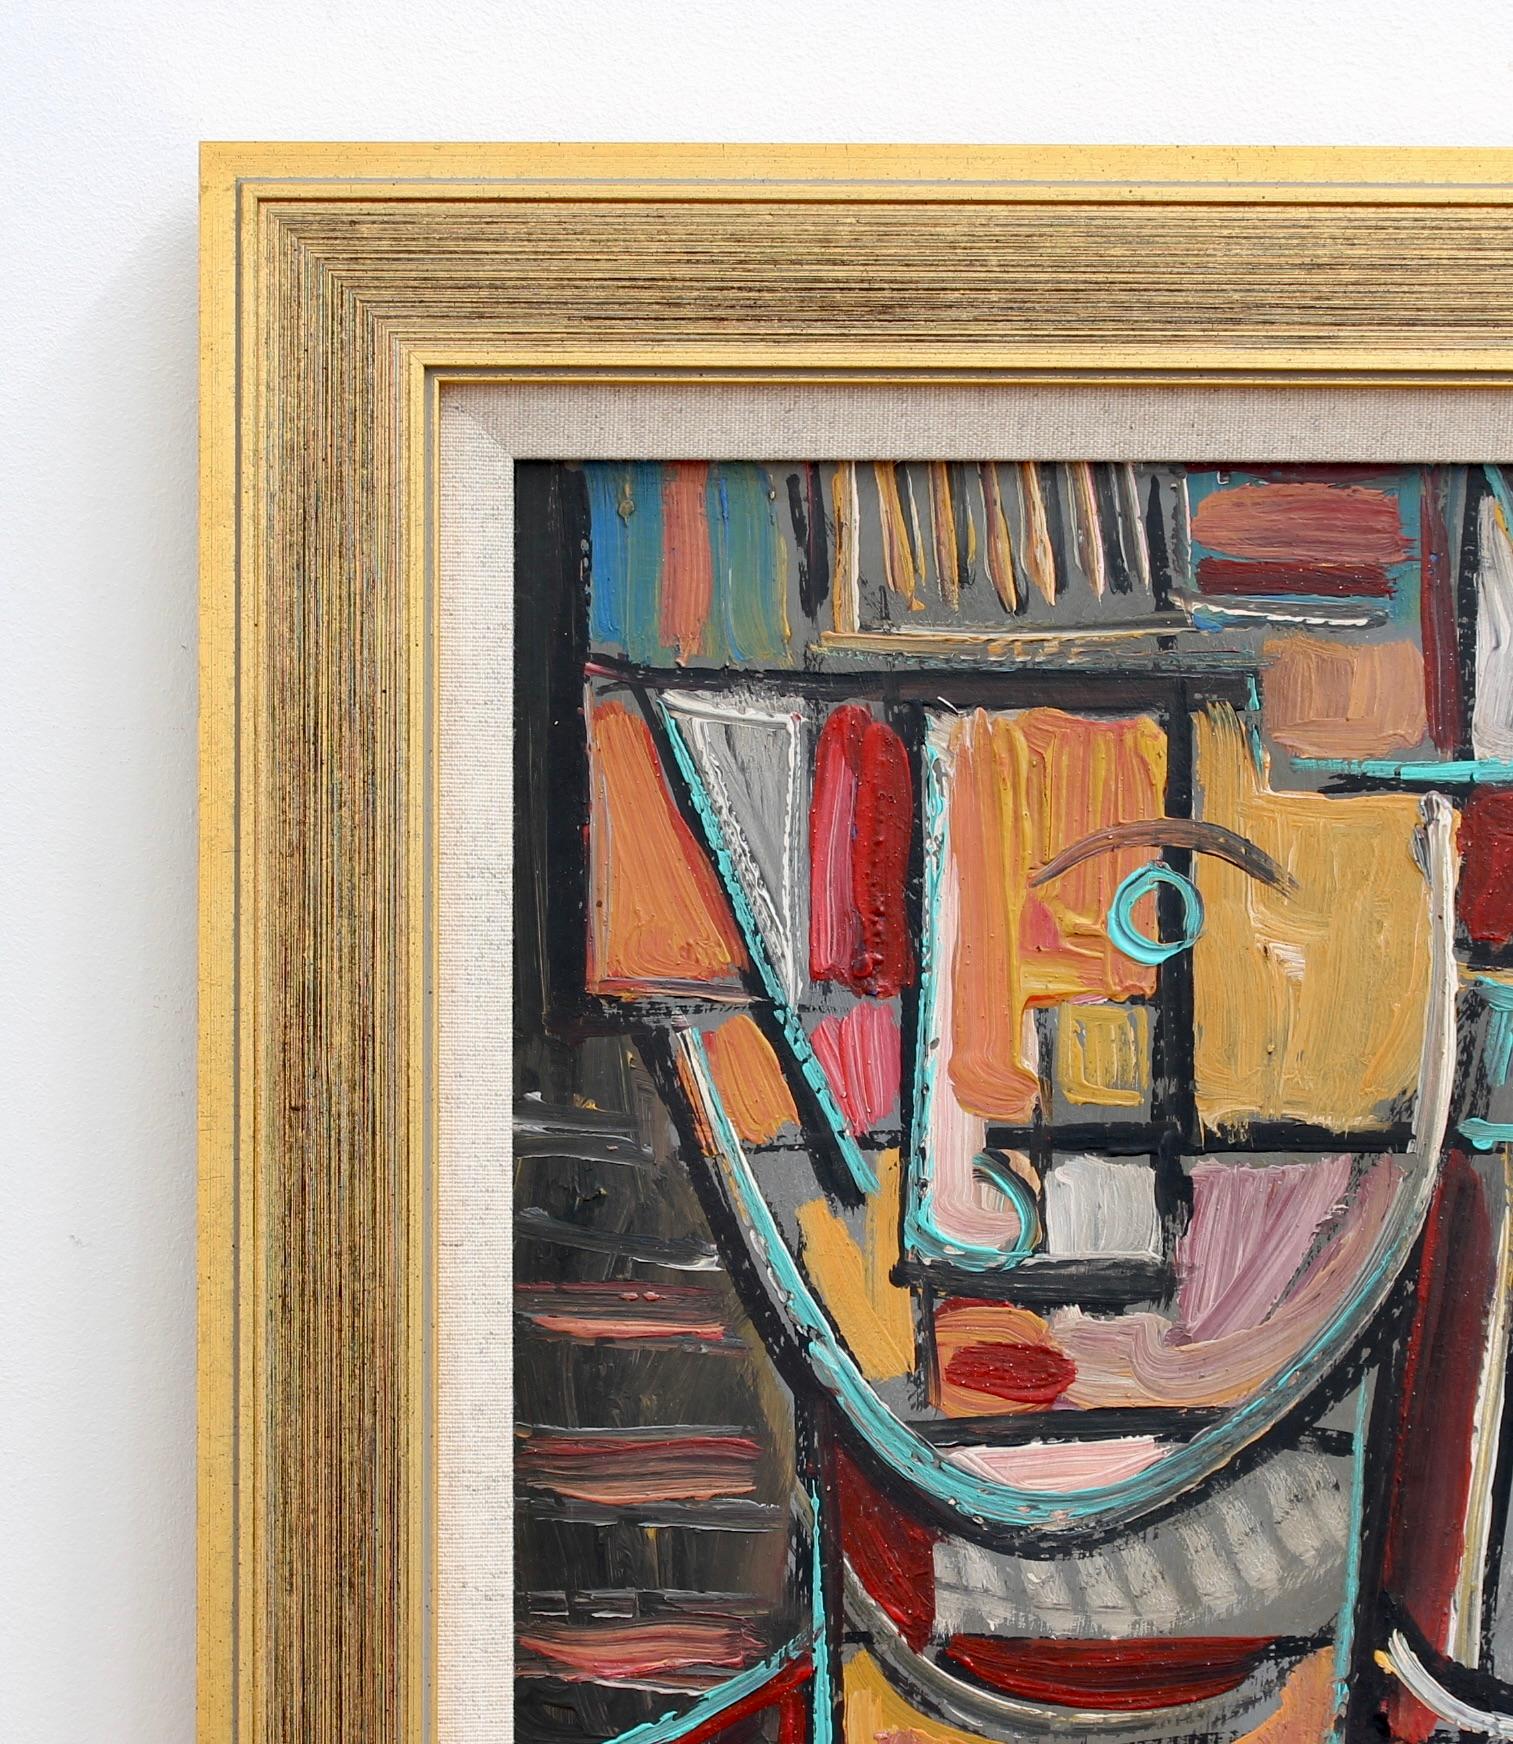 'Portrait of Cubist Man', Berlin School (circa 1960s) - Abstract Painting by Unknown